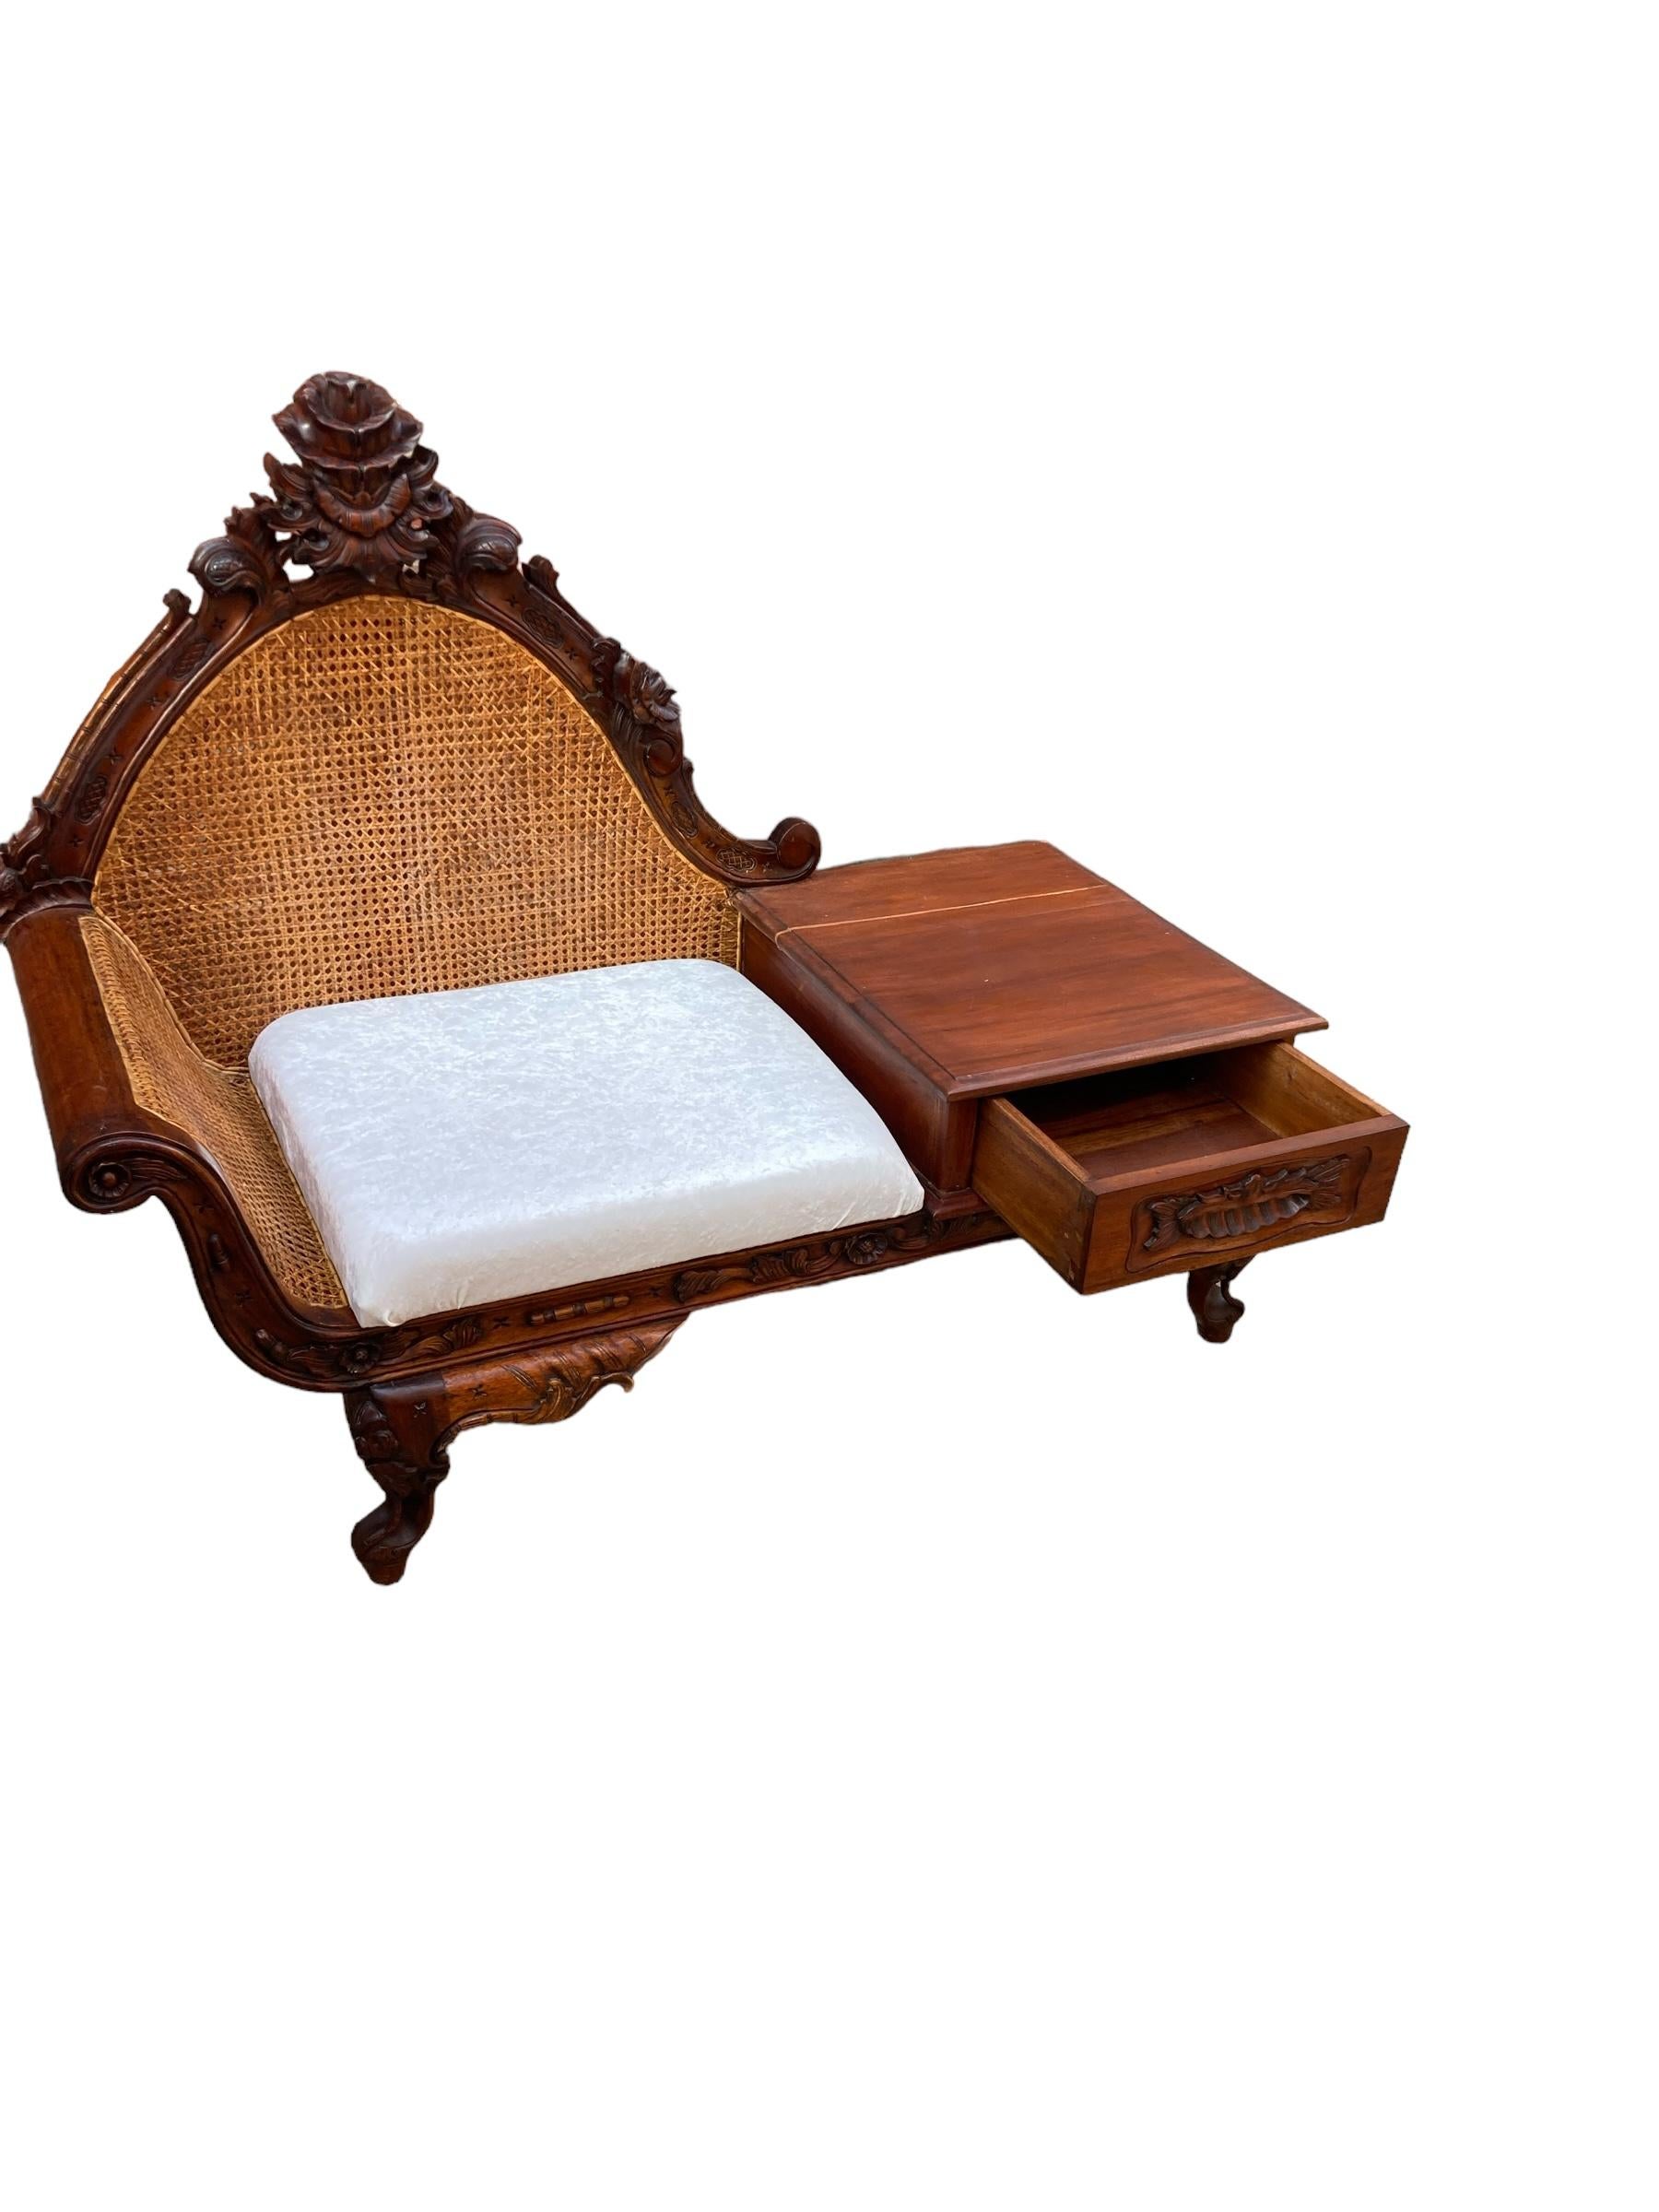 Bouclé Original Hand Carved Mahogany Victorian Telephone or Gossip Bench, Bergere  For Sale